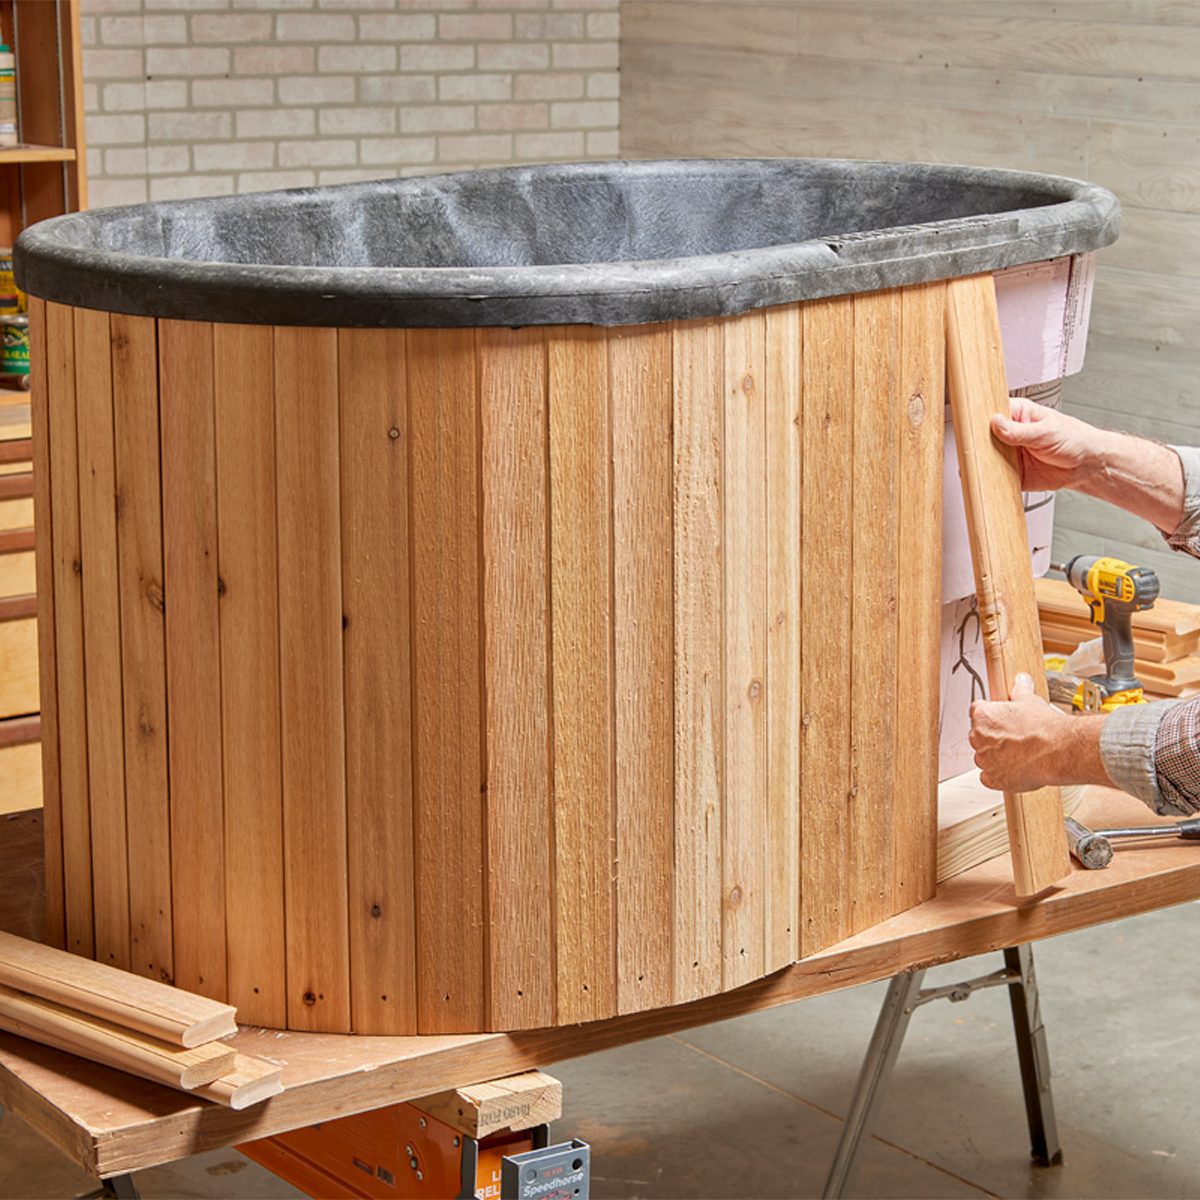 How to Build a Wood-Fired Hot Tub